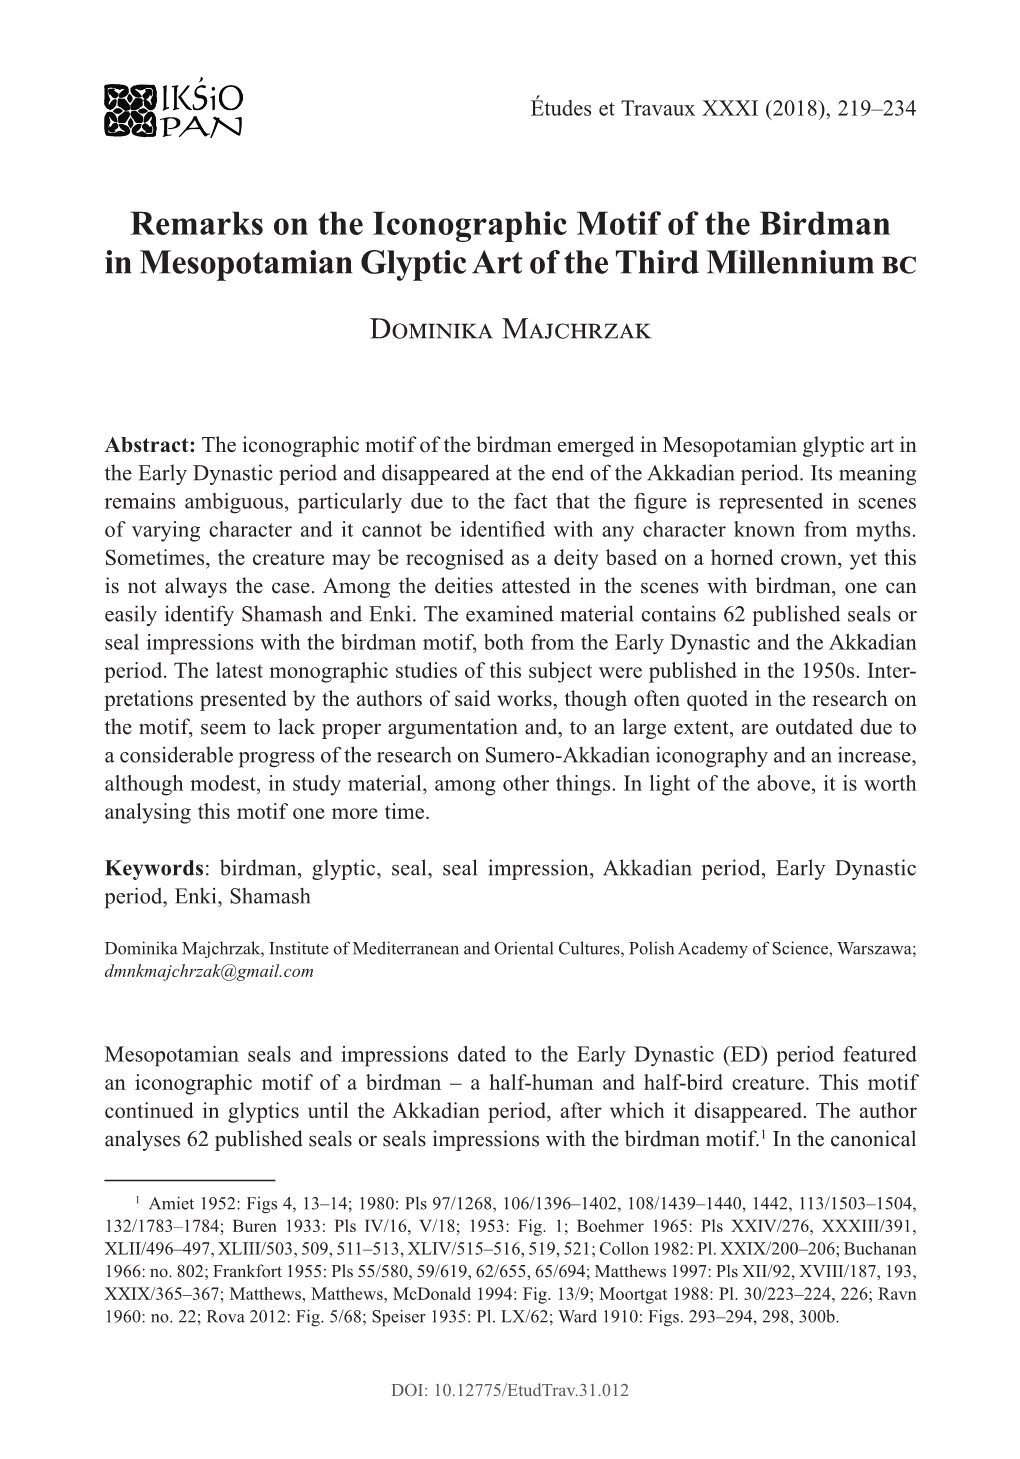 Remarks on the Iconographic Motif of the Birdman in Mesopotamian Glyptic Art of the Third Millennium 